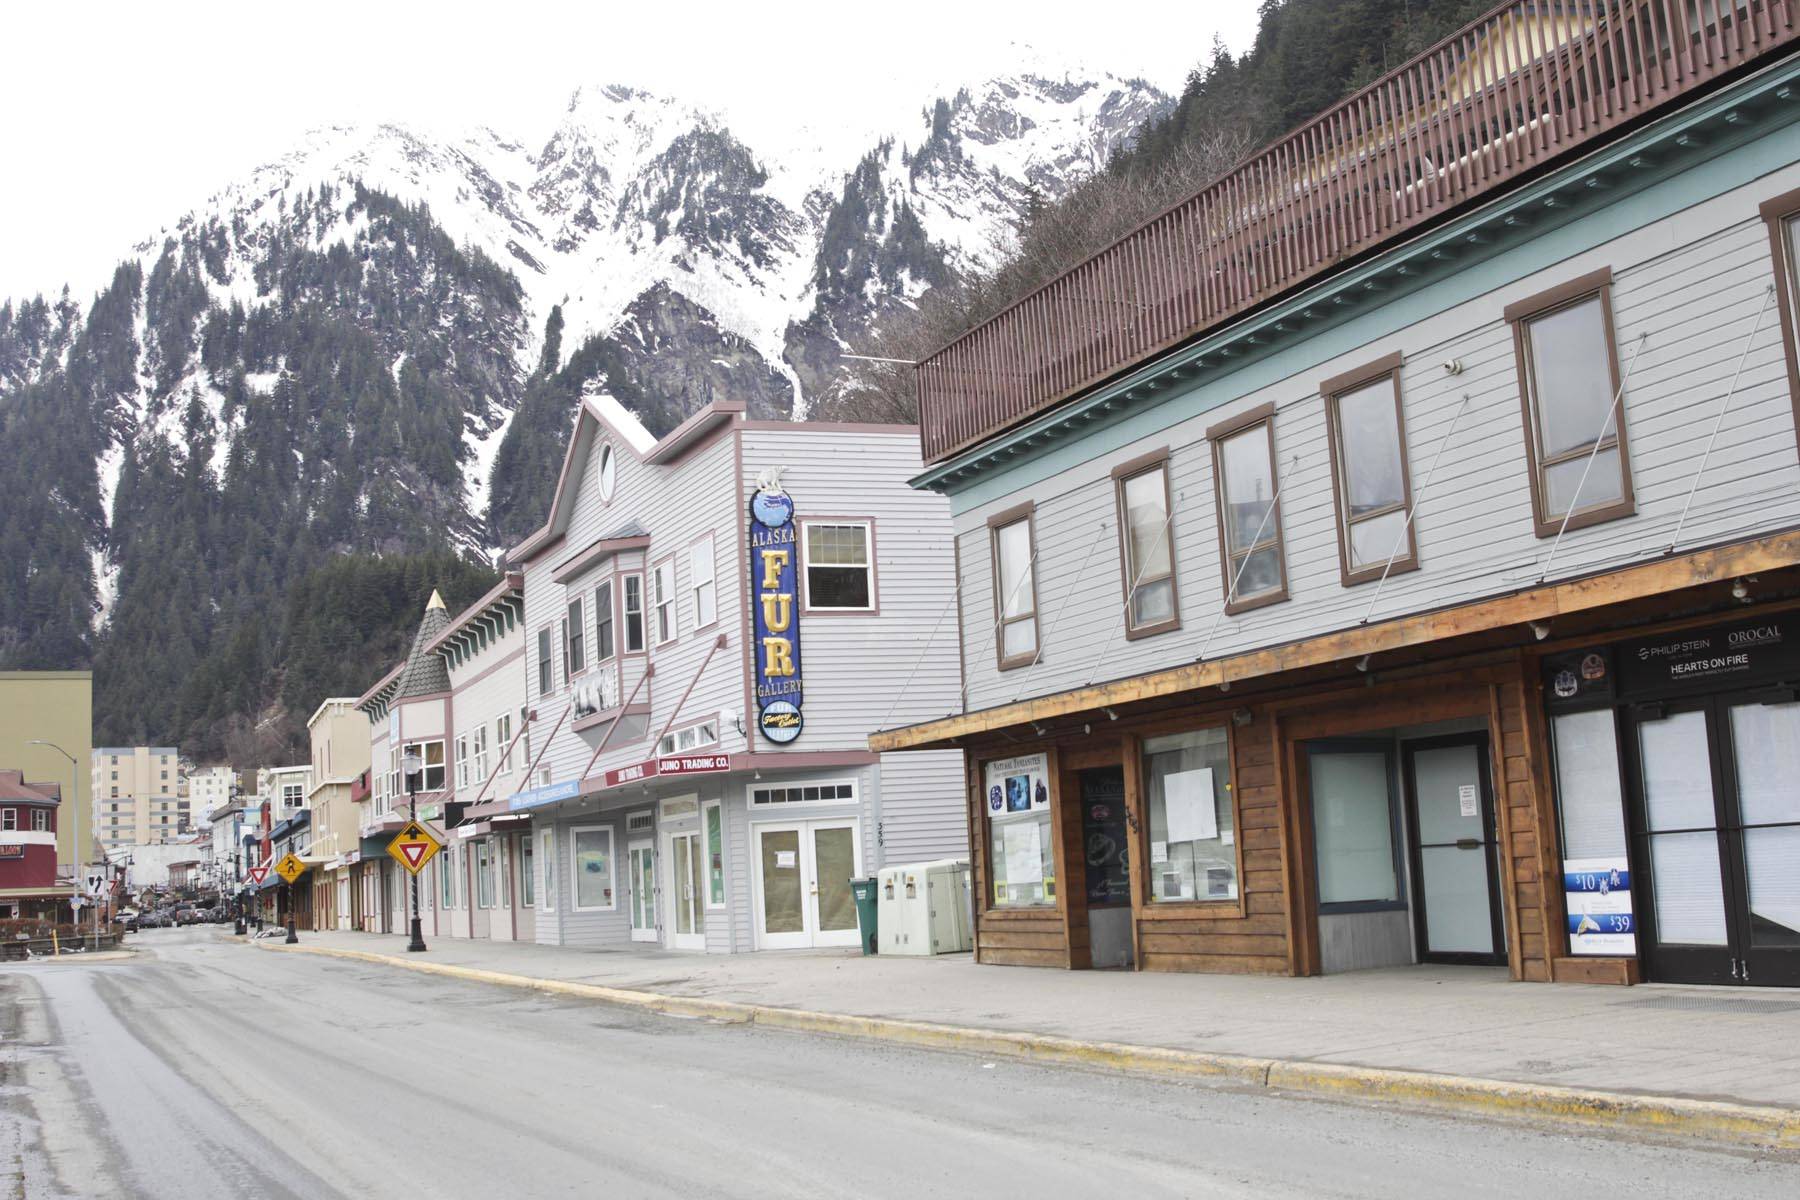 No cruises till July at the earliest mean these tourist-targeted shops downtown will likely remain shuttered for months longer, March 20, 2020. (Michael S. Lockett | Juneau Empire)